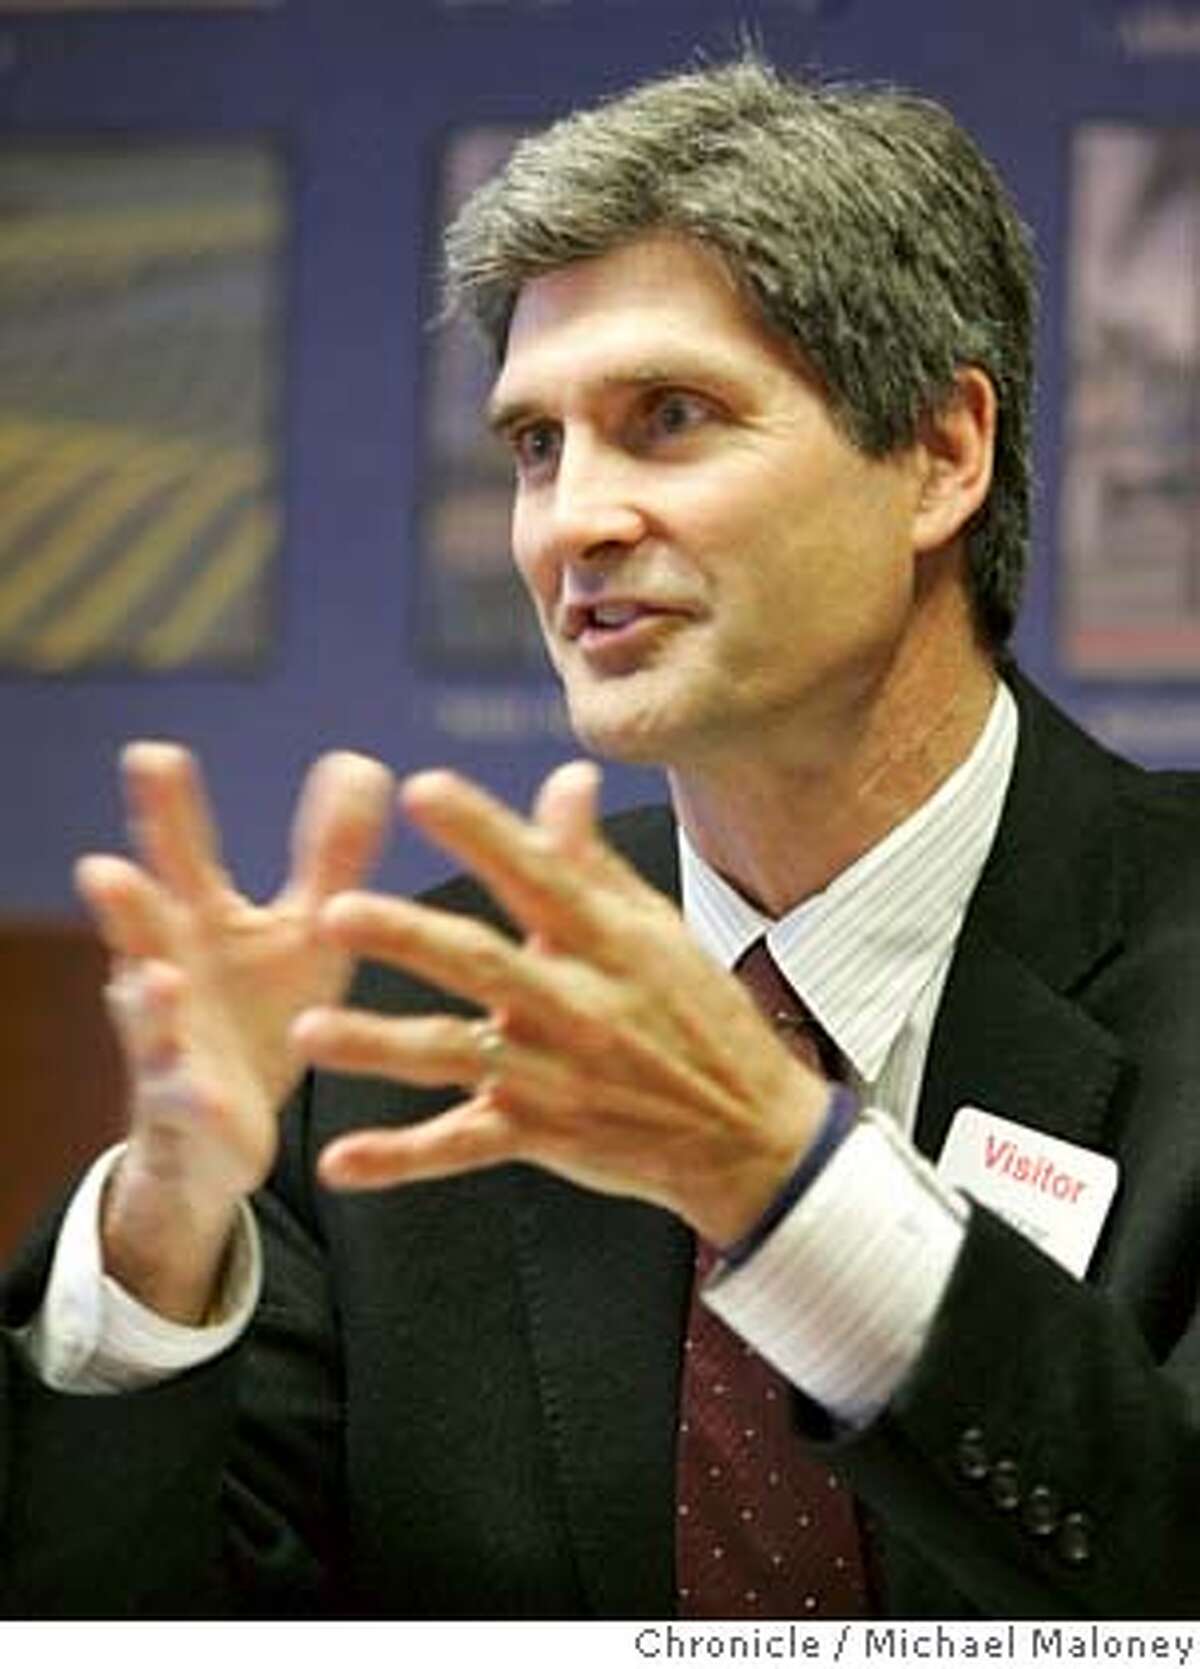 Carl Guardino, president and CEO of the Silicon Valley Leadership Group talks with the Chronicle business reporters at the Chronicle offices on Thursday, April 19, 2007. Photo by Michael Maloney / San Francisco Chronicle *** Carl Guardino Ran on: 05-13-2007 Carl Guardino and San Joses then-mayor, Ron Gonzalez (left), appear at a 2005 legislative meeting in Sacramento. Guardino and legislators often discuss the Silicon Valley Leadership Groups agenda. MANDATORY CREDIT FOR PHOTOG AND SF CHRONICLE/NO SALES-MAGS OUT